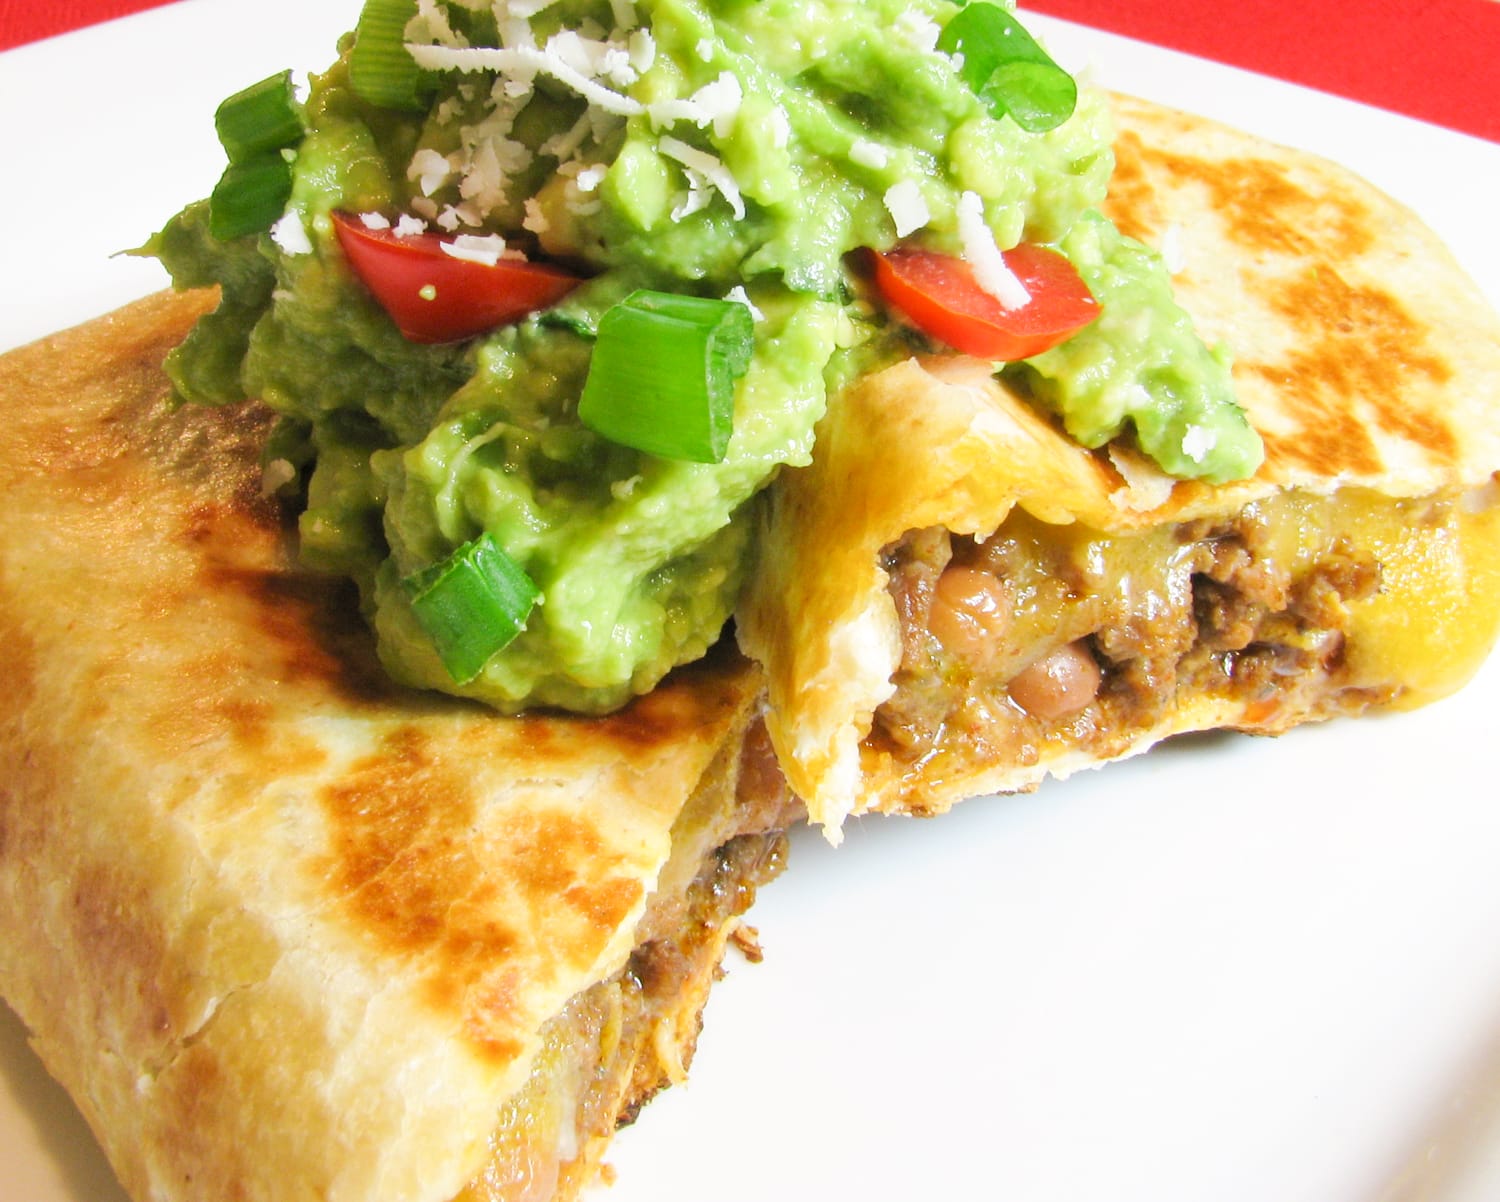 Baked Beef and Bean Chimichangas